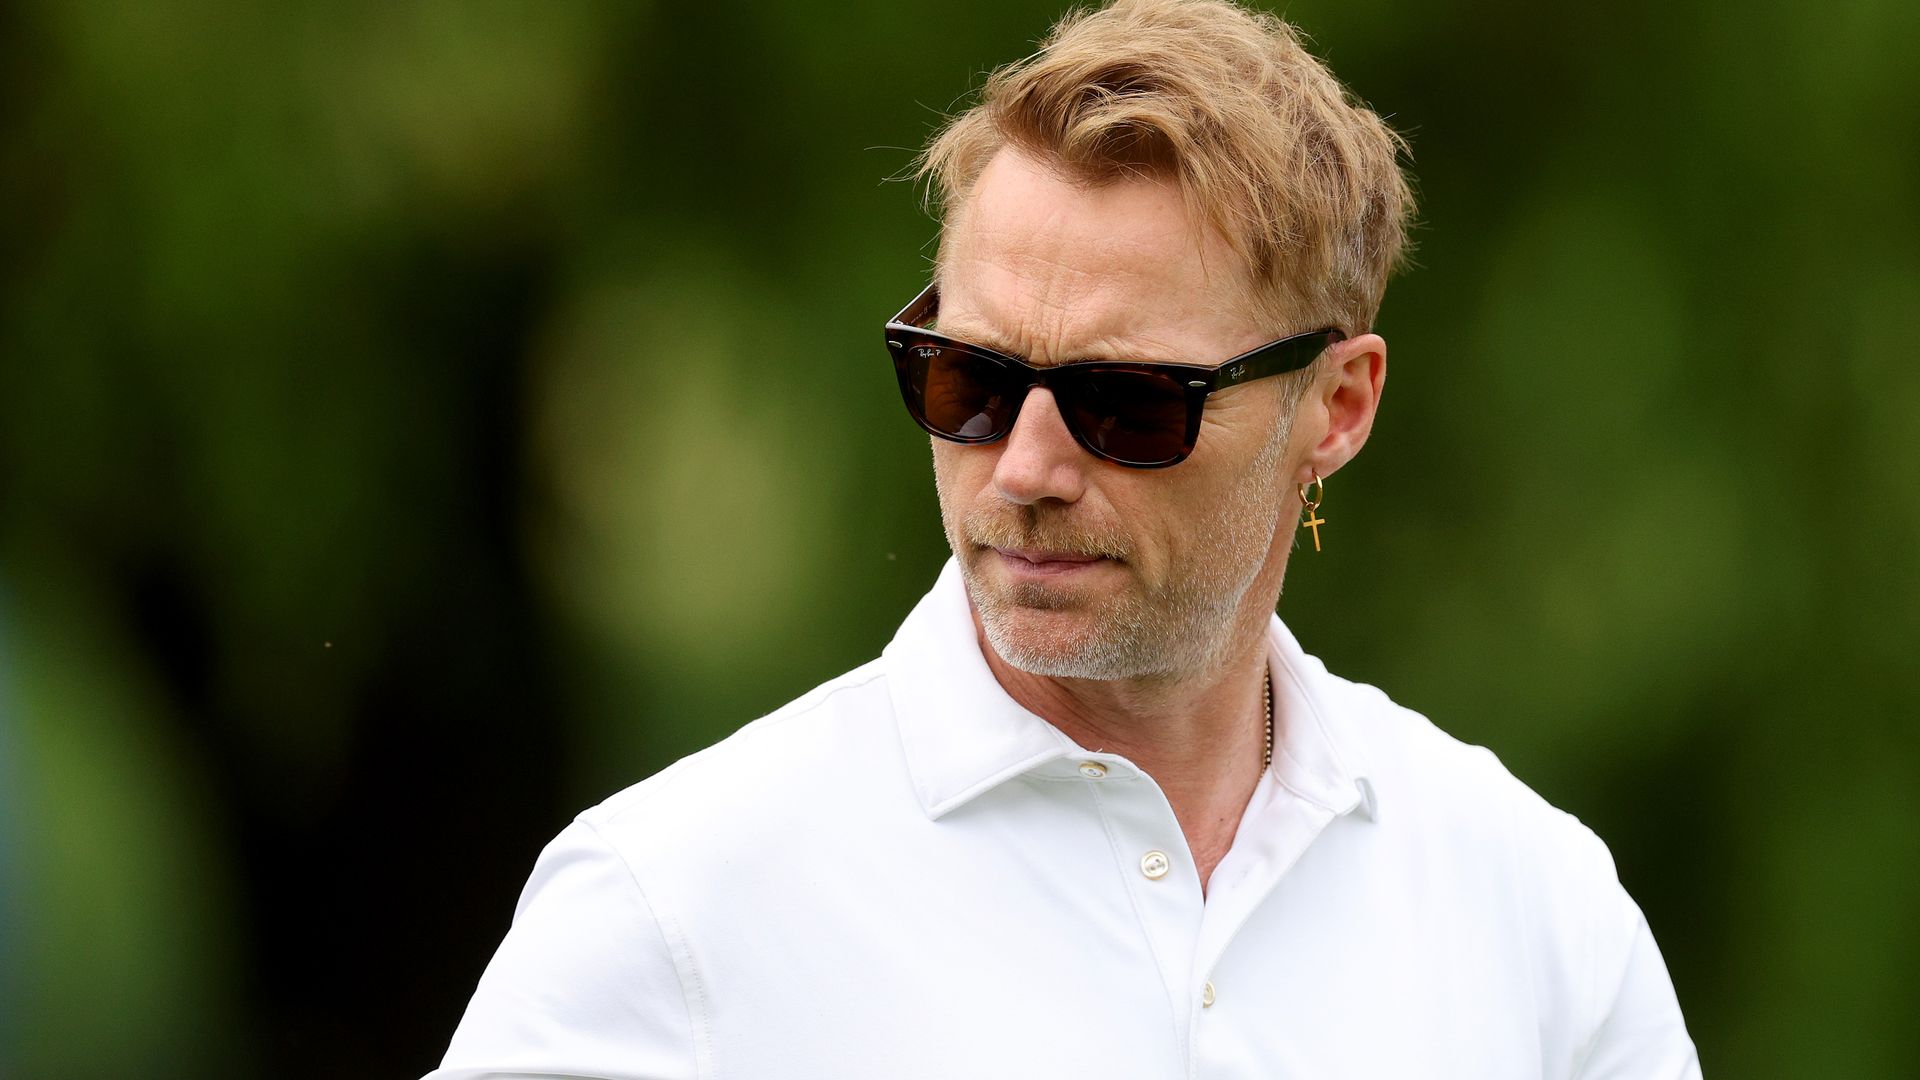 Ronan Keating serious in white top and glasses